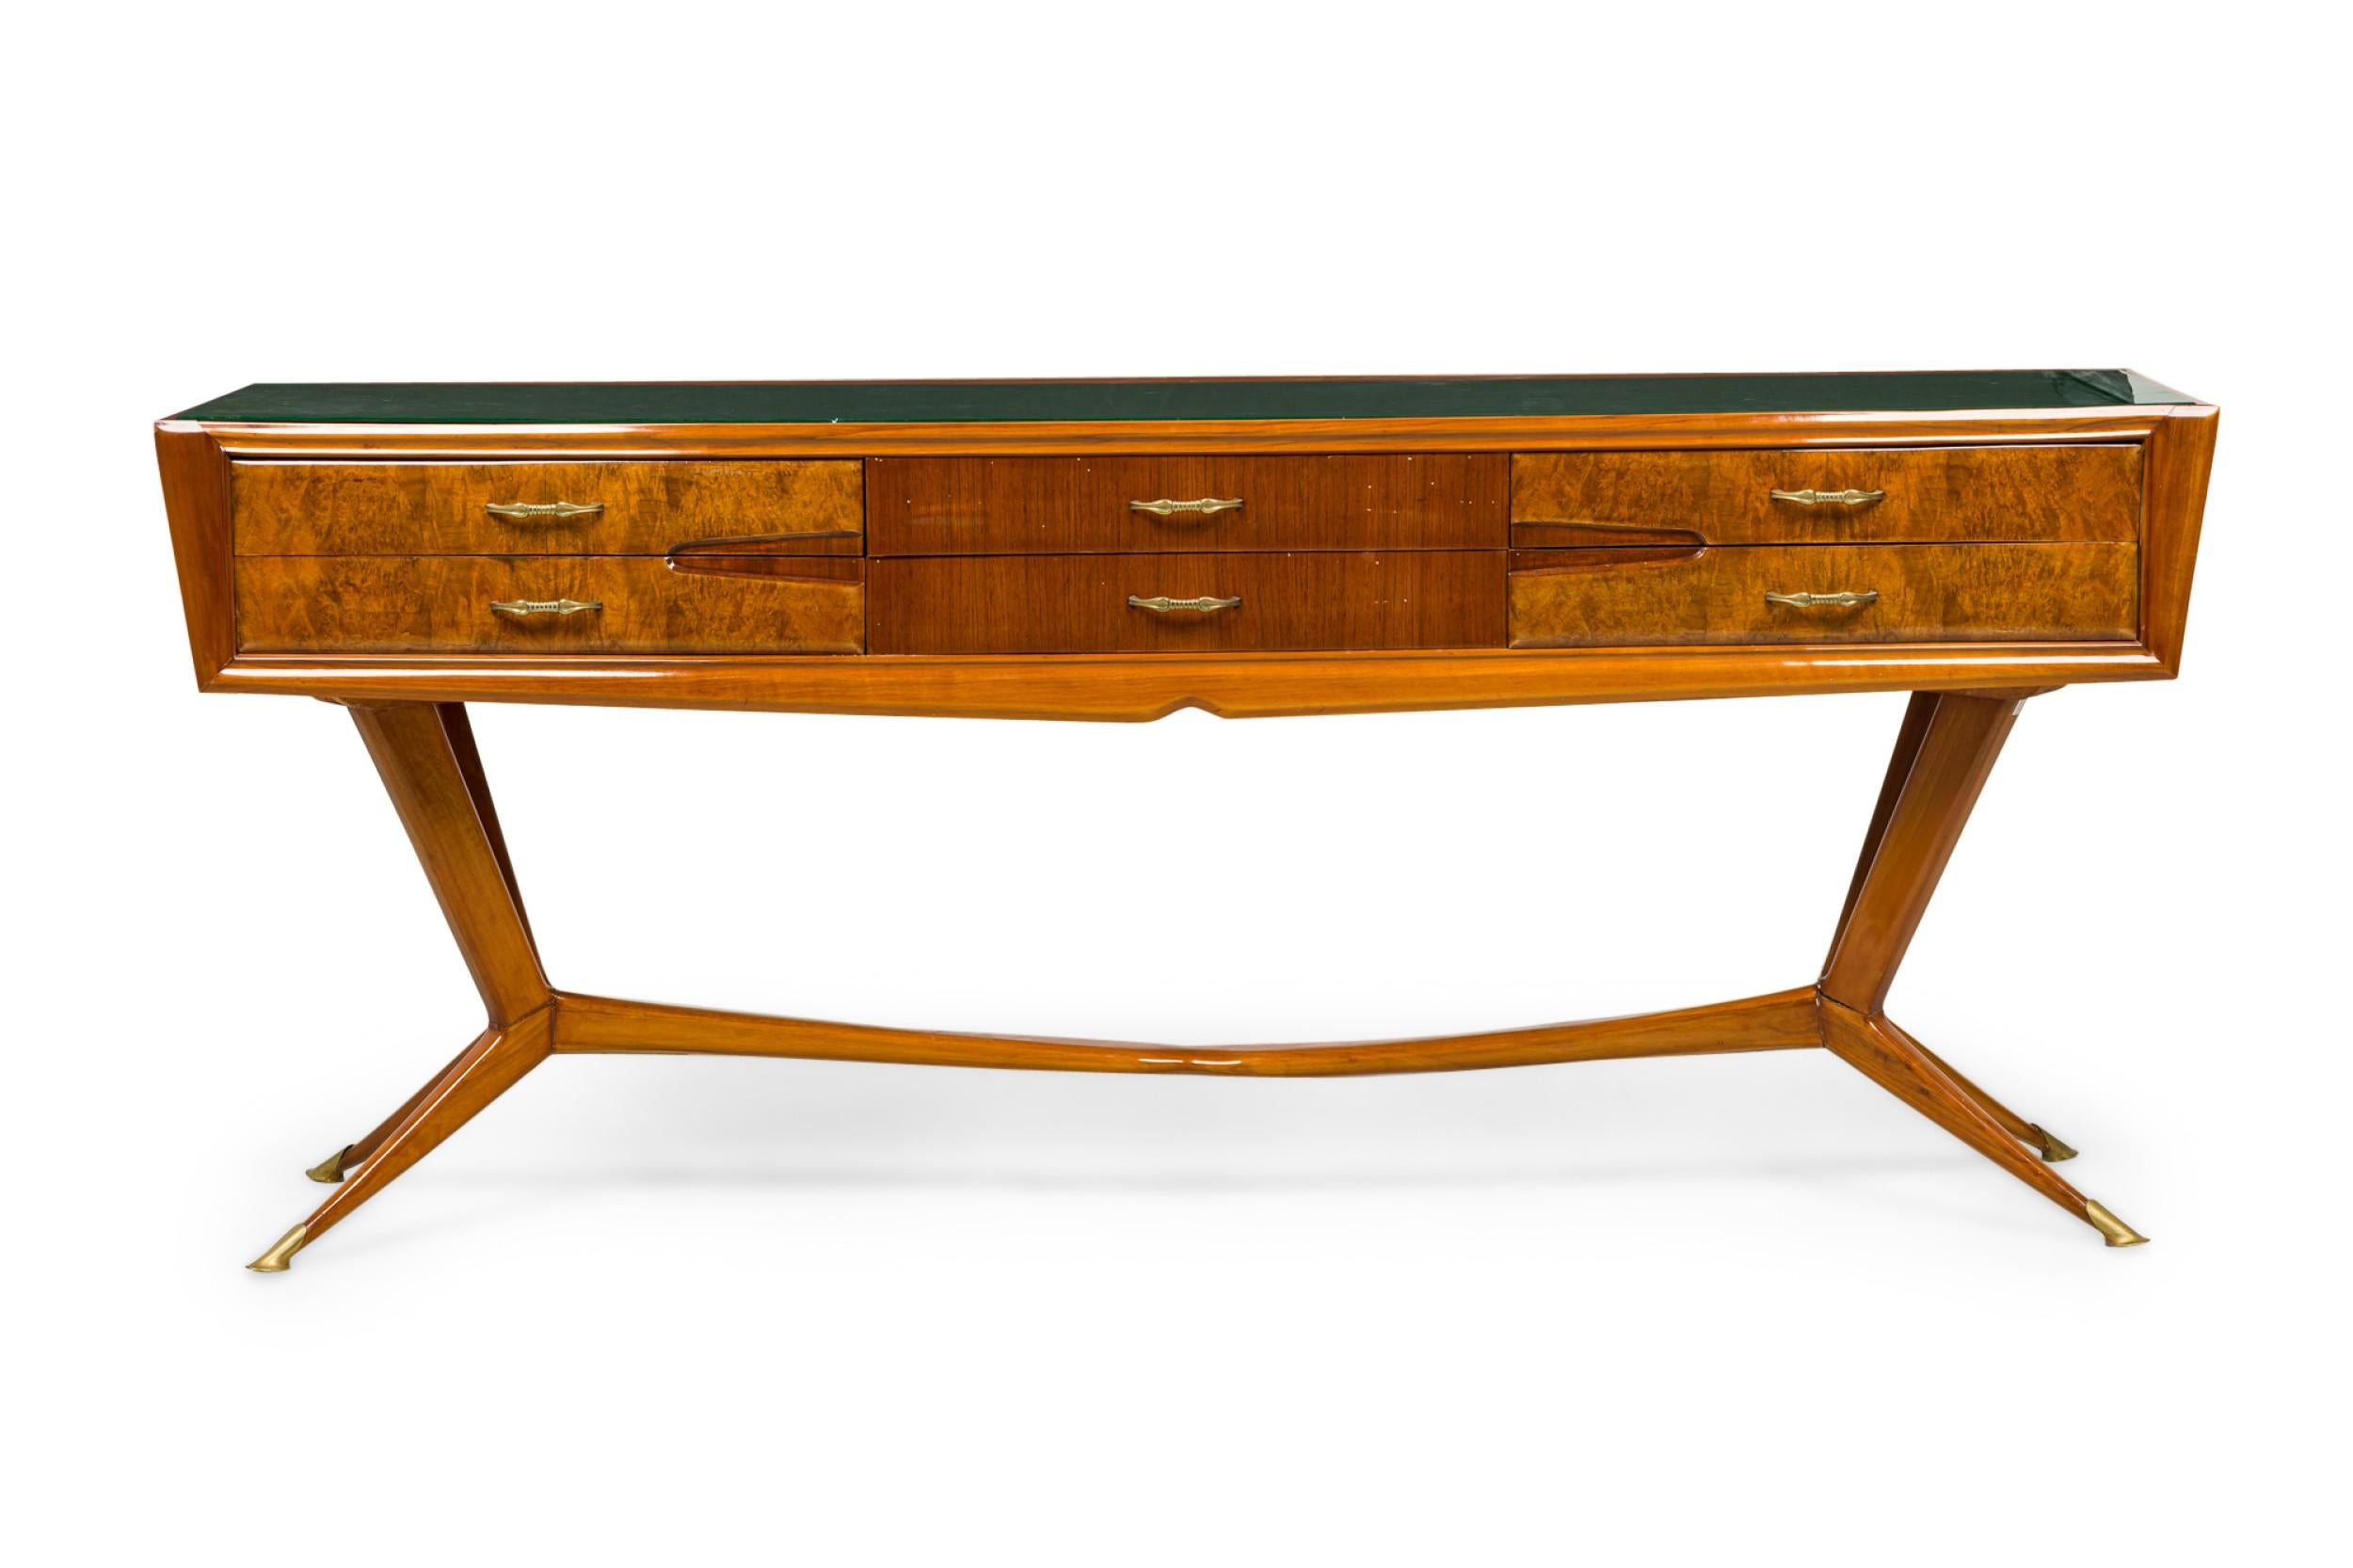 Italian Mid-Century (1954) buffet / console table with a wood cabinet featuring contrasting decorative wood veneers, 6 drawers with brass drawer pulls, topped with a green glass top with gilt detail, and resting on four angular legs joined with a